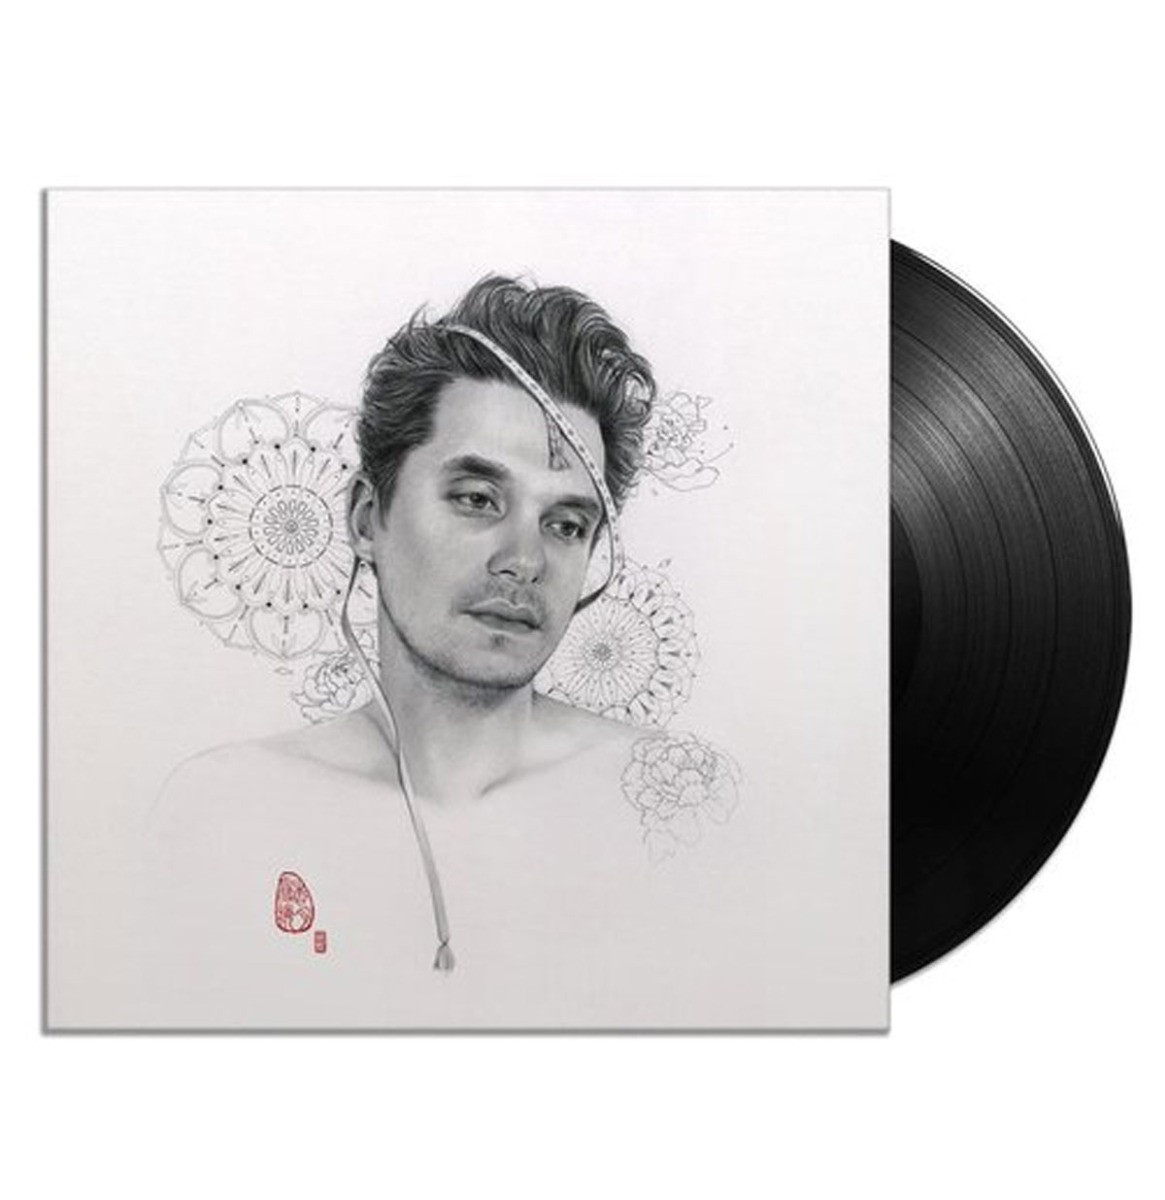 John Mayer - The Search For Everything 2-LP